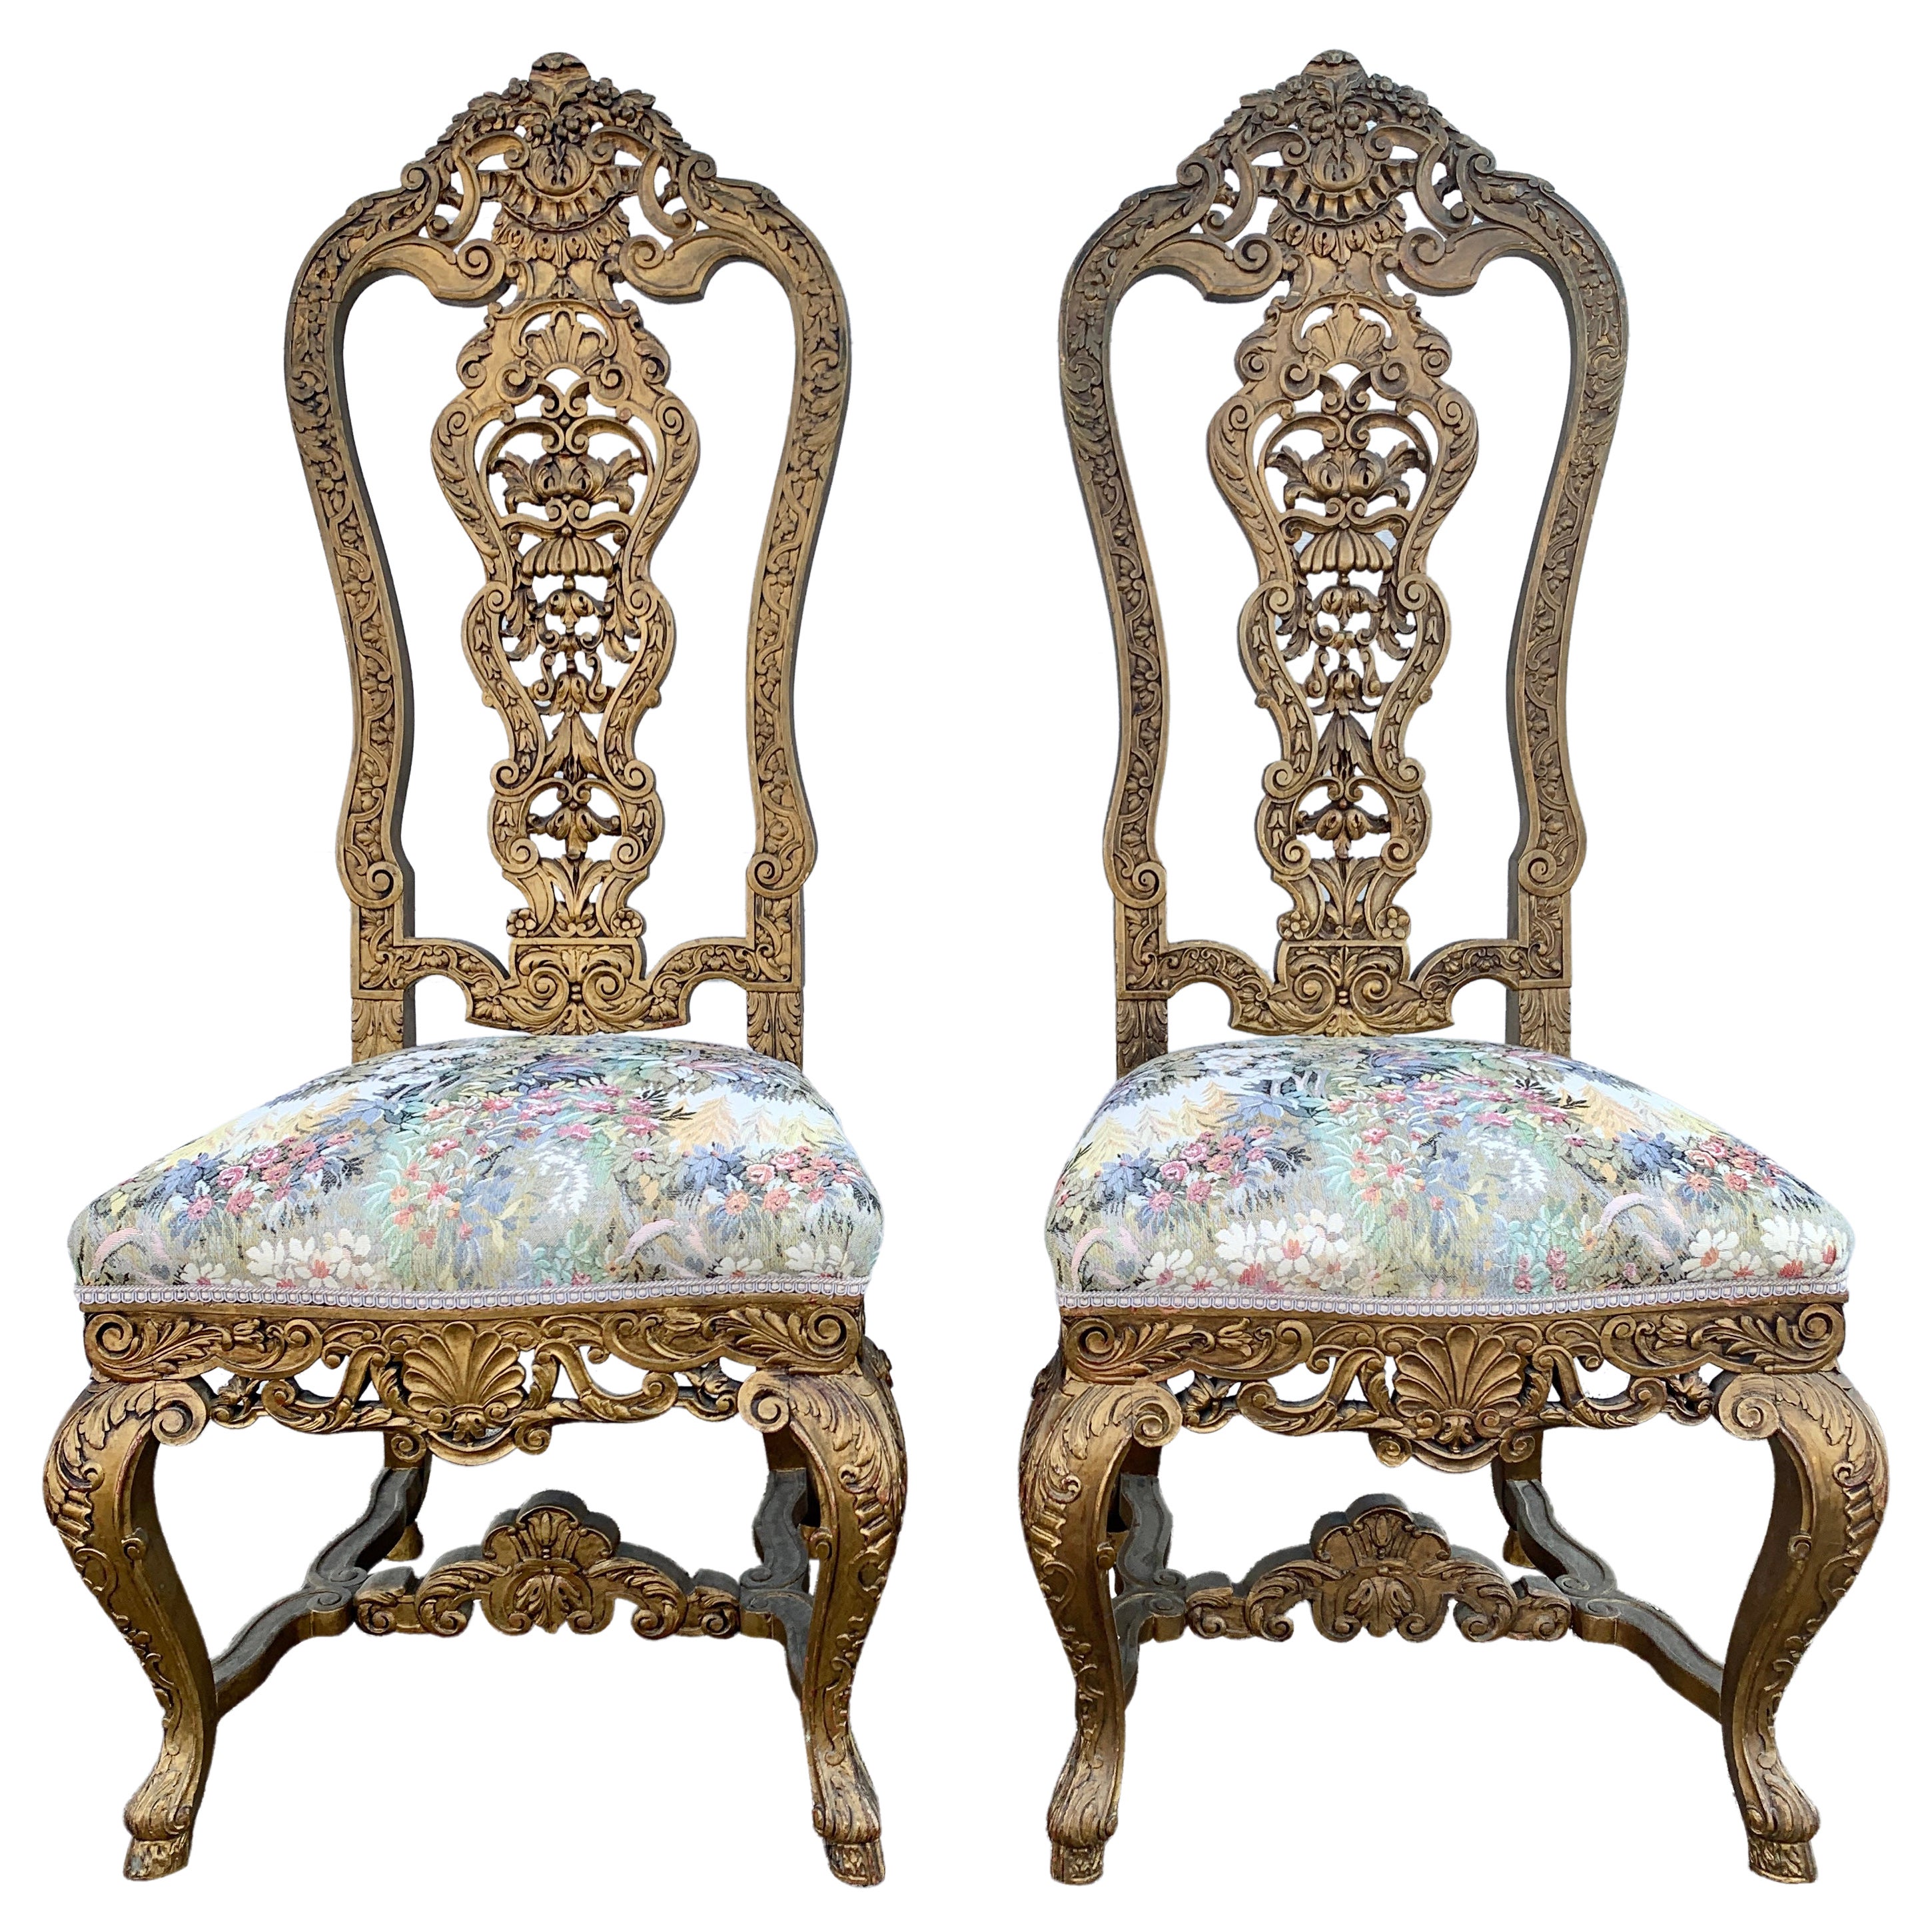 19th Century Antique Venetian Carved Gold Giltwood Throne Chairs, Pair